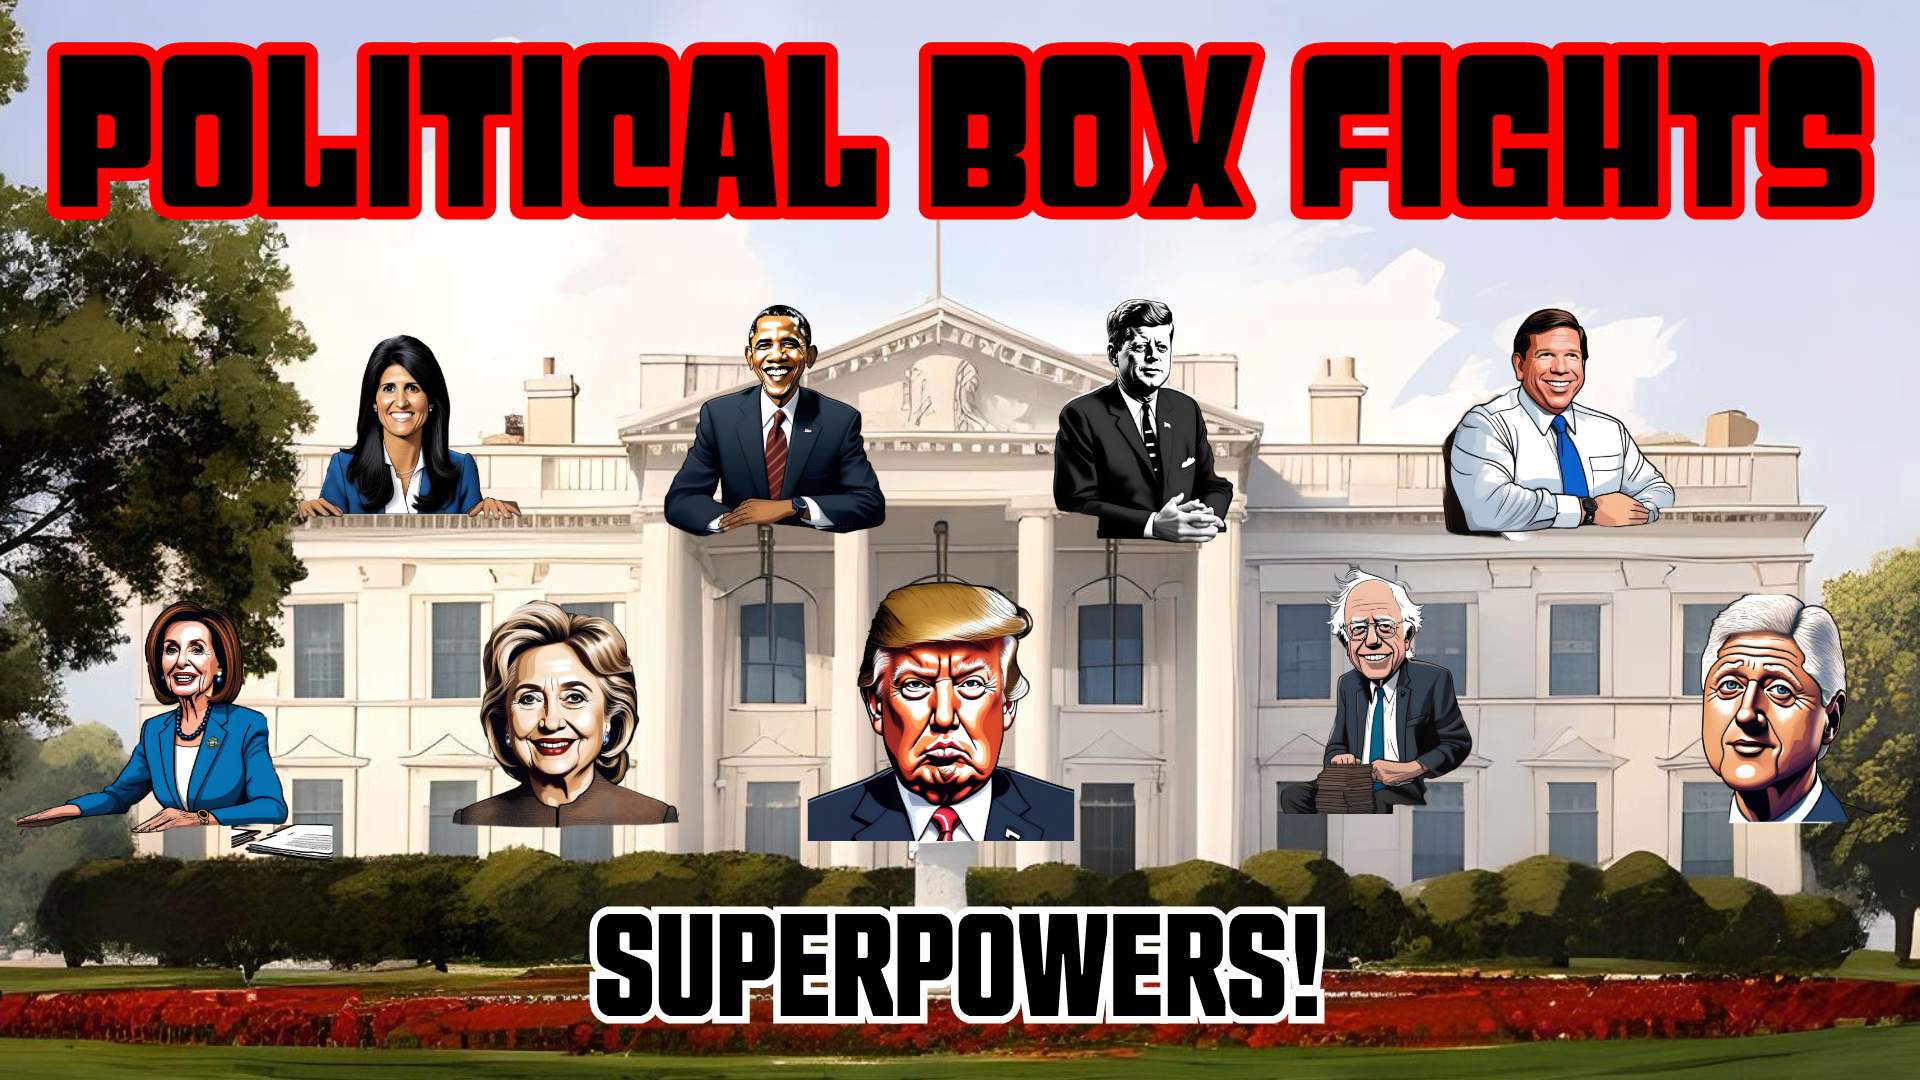 Political Box Fights - Superpowers 3489-6255-3247